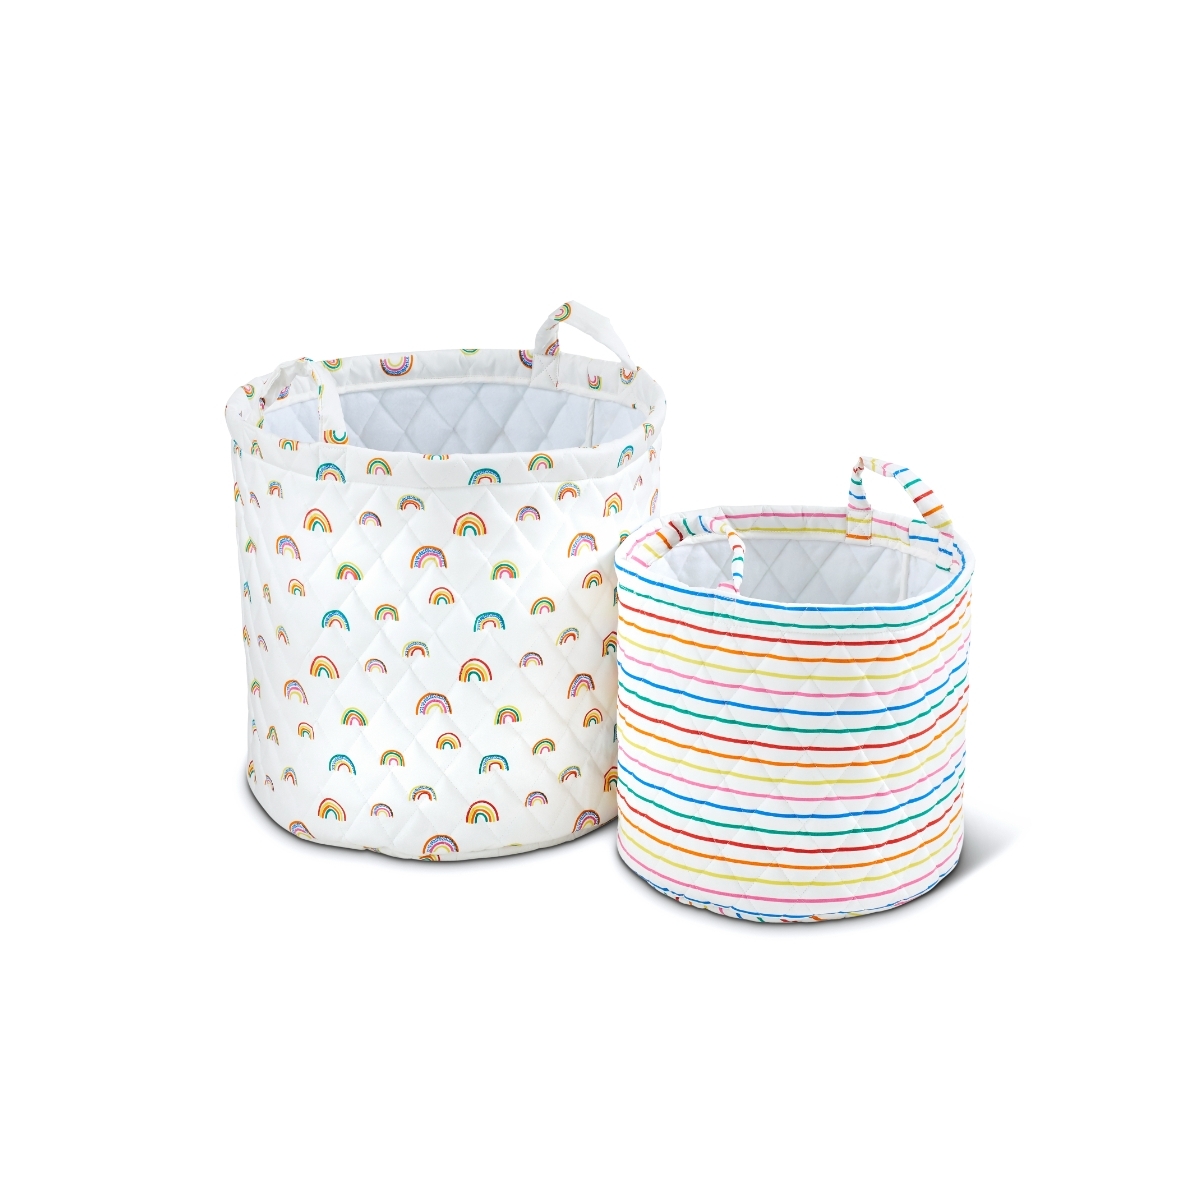 Ickle Bubba Rainbow Dream Pack of 2 Storage Baskets